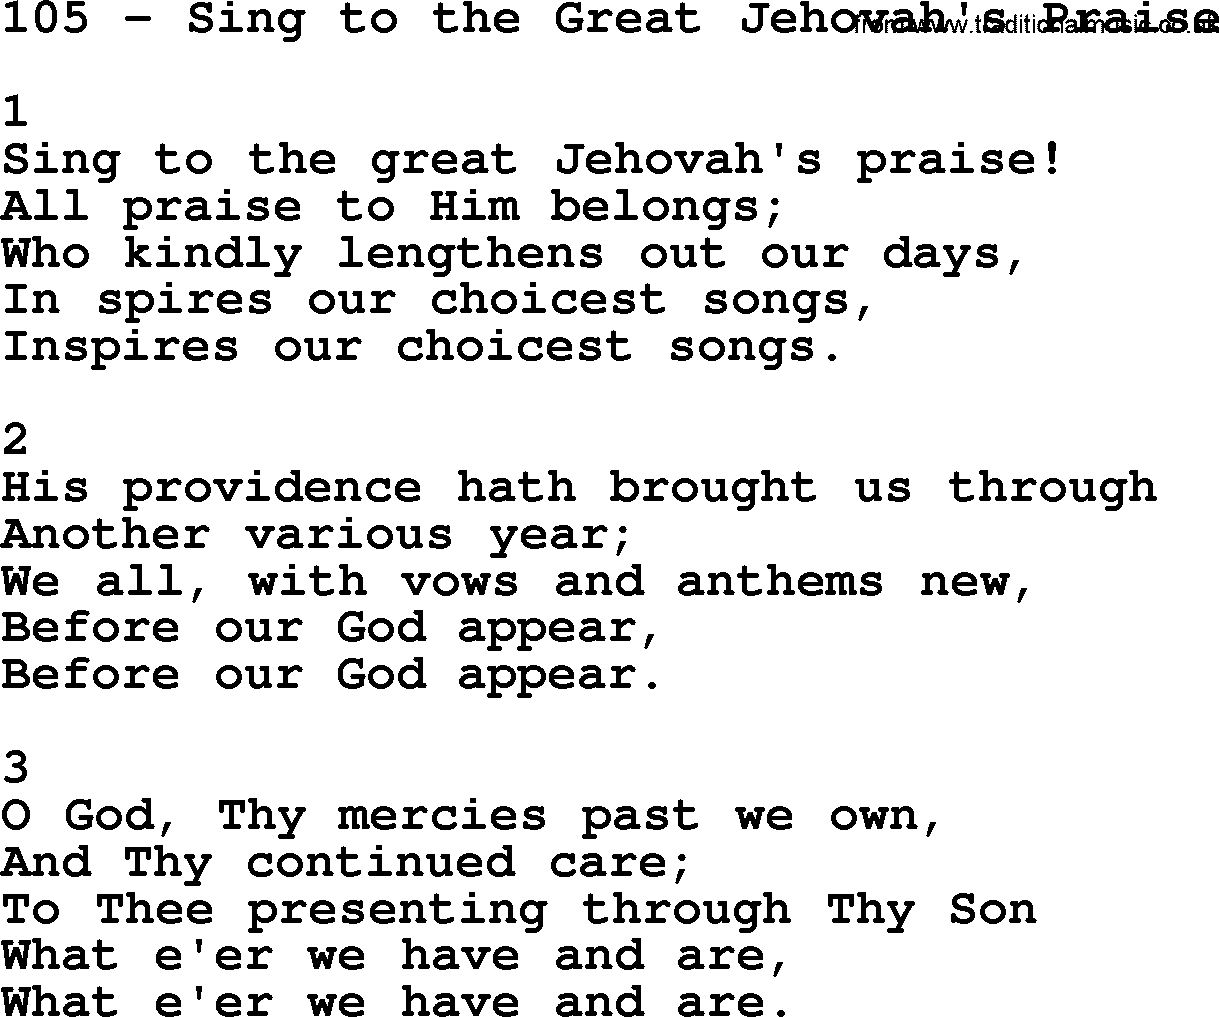 Complete Adventis Hymnal, title: 105-Sing To The Great Jehovah's Praise, with lyrics, midi, mp3, powerpoints(PPT) and PDF,